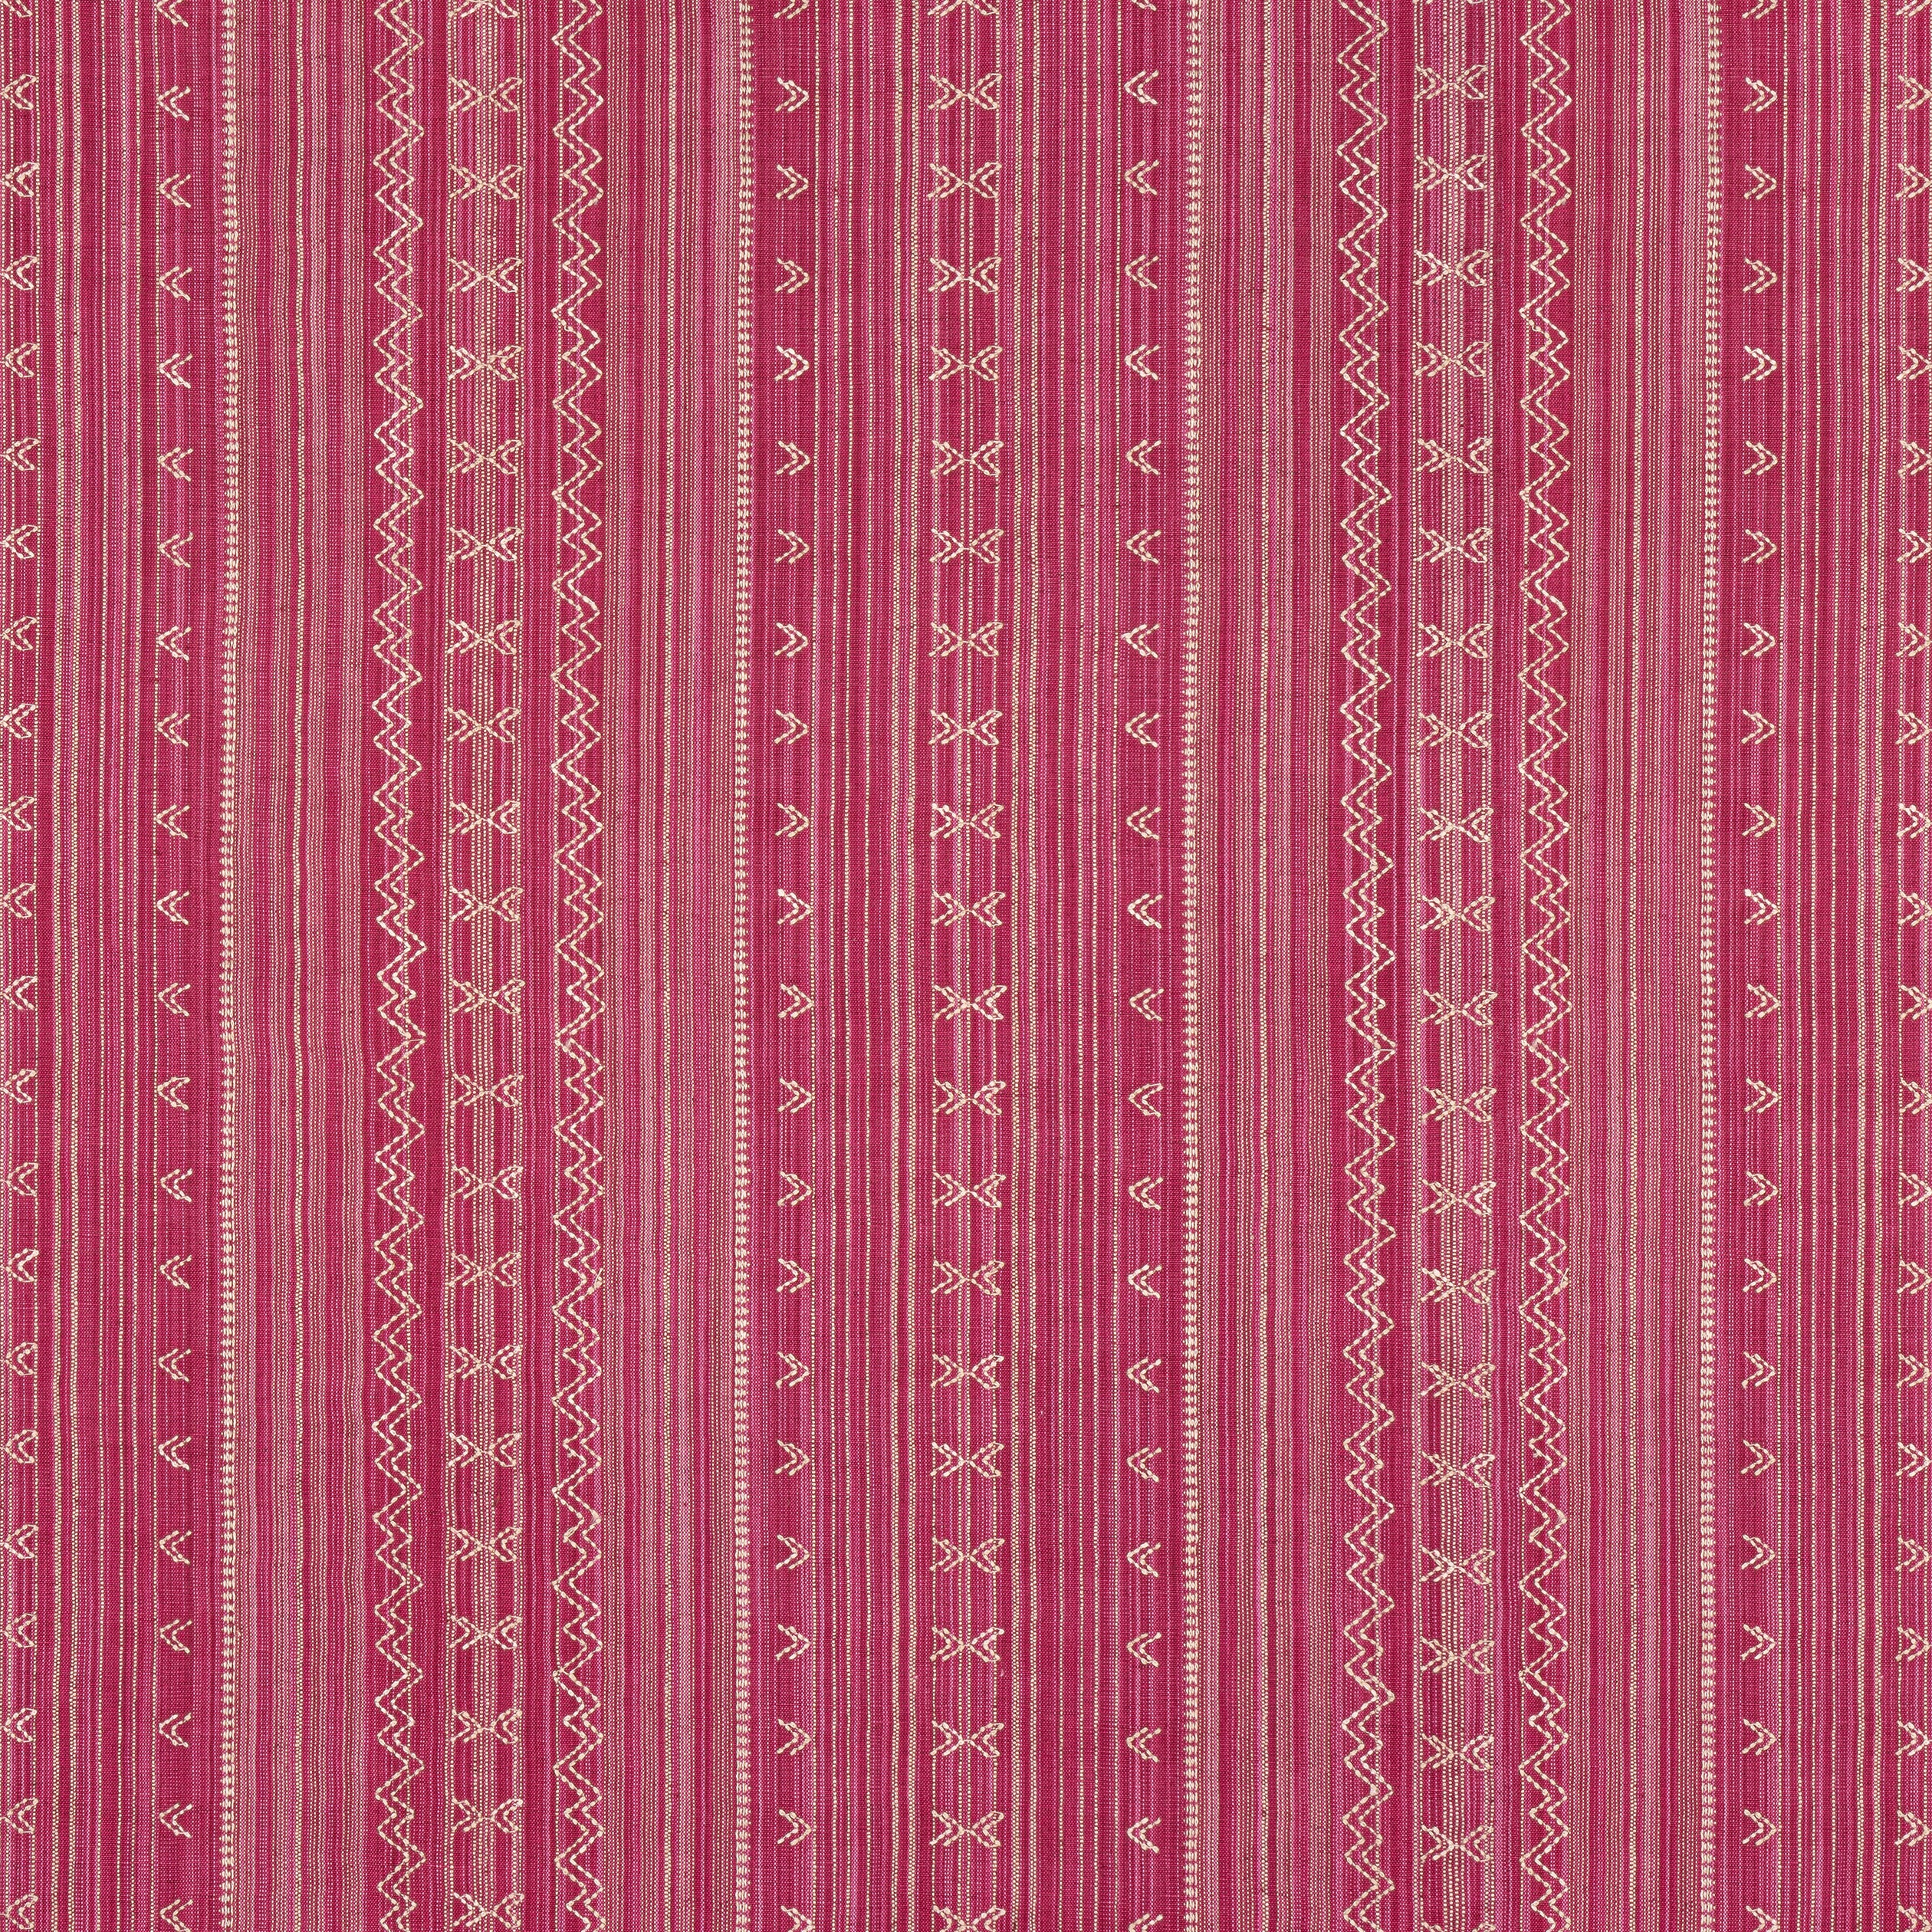 Charter Stripe Embroidery fabric in raspberry color - pattern number W736454 - by Thibaut in the Indienne collection